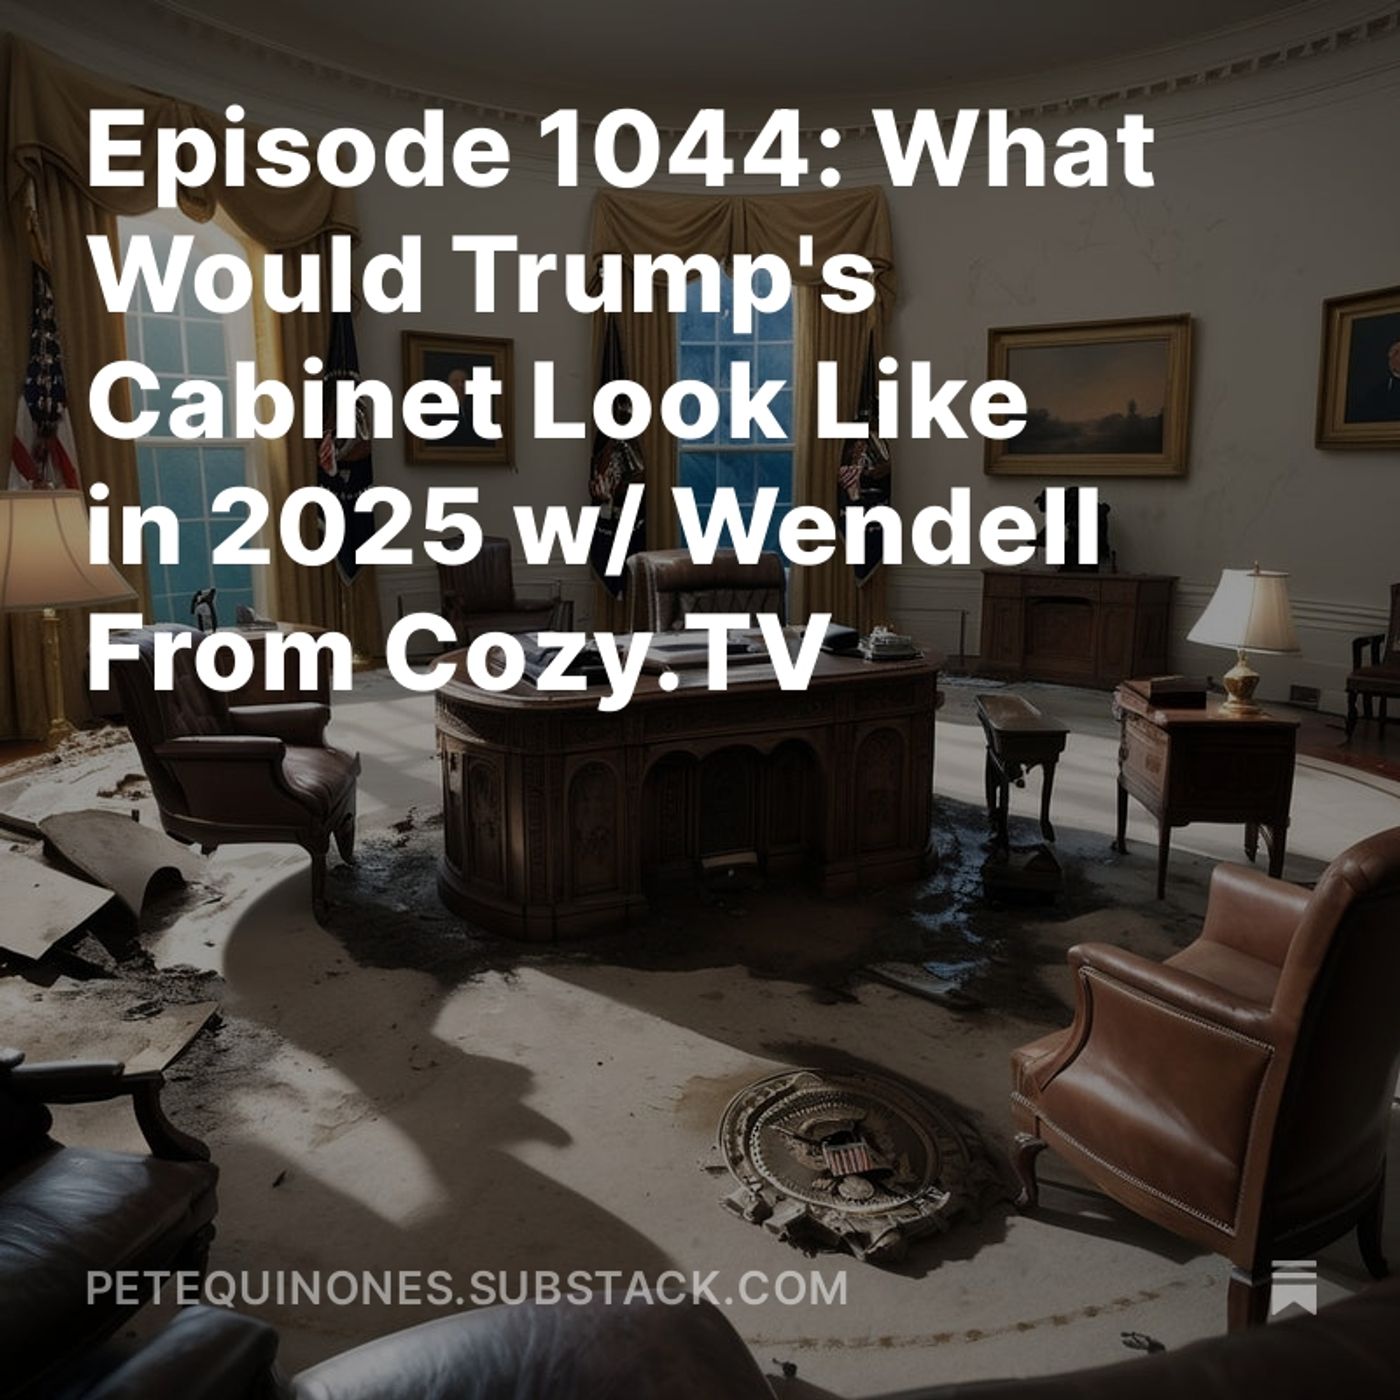 Episode 1044: What Would Trump’s Cabinet Look Like in 2025 w/ Wendell From Cozy.TV